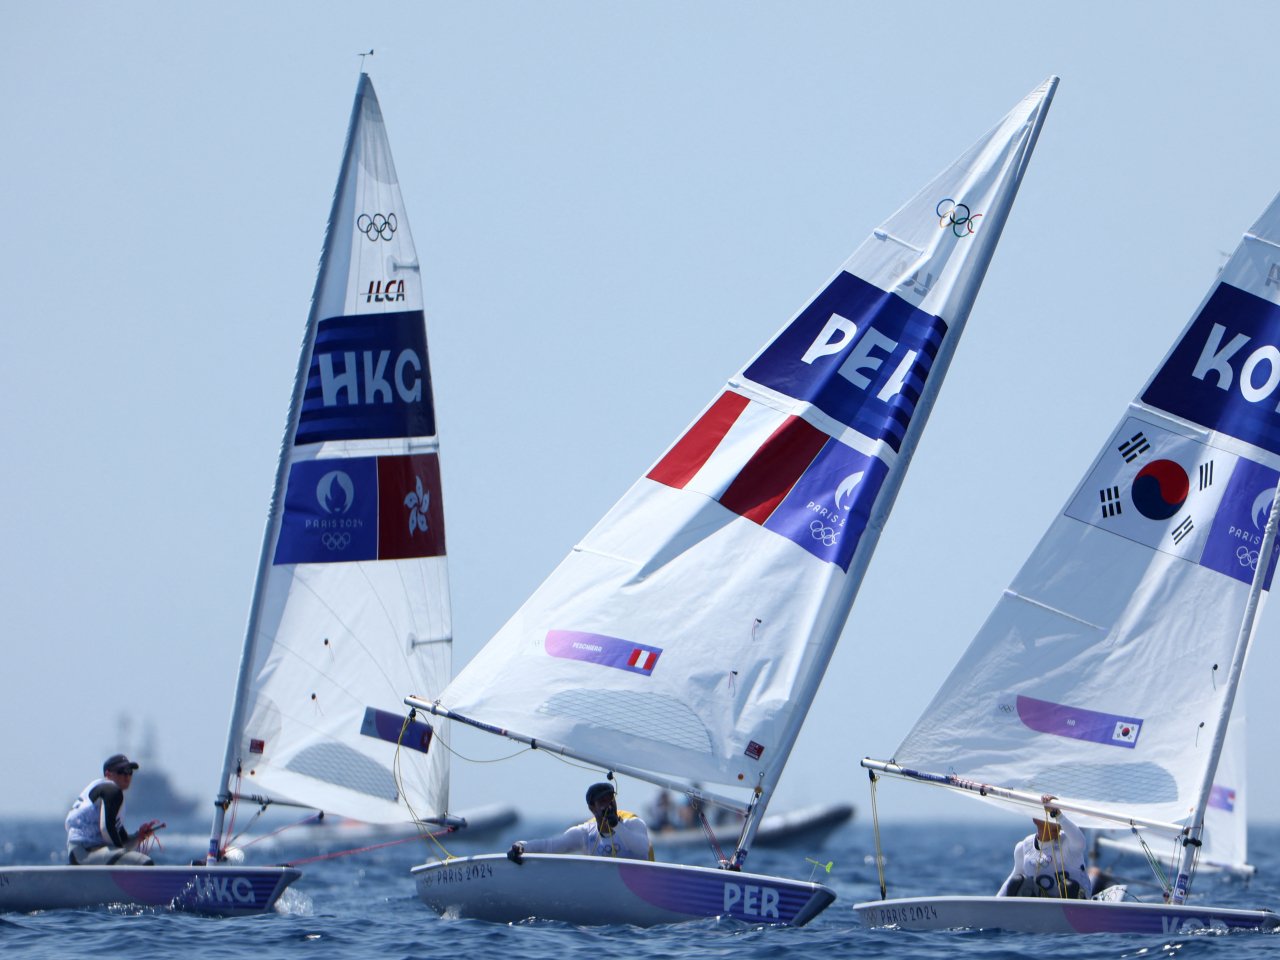 HK's Halliday ranks 28th after four dinghy races